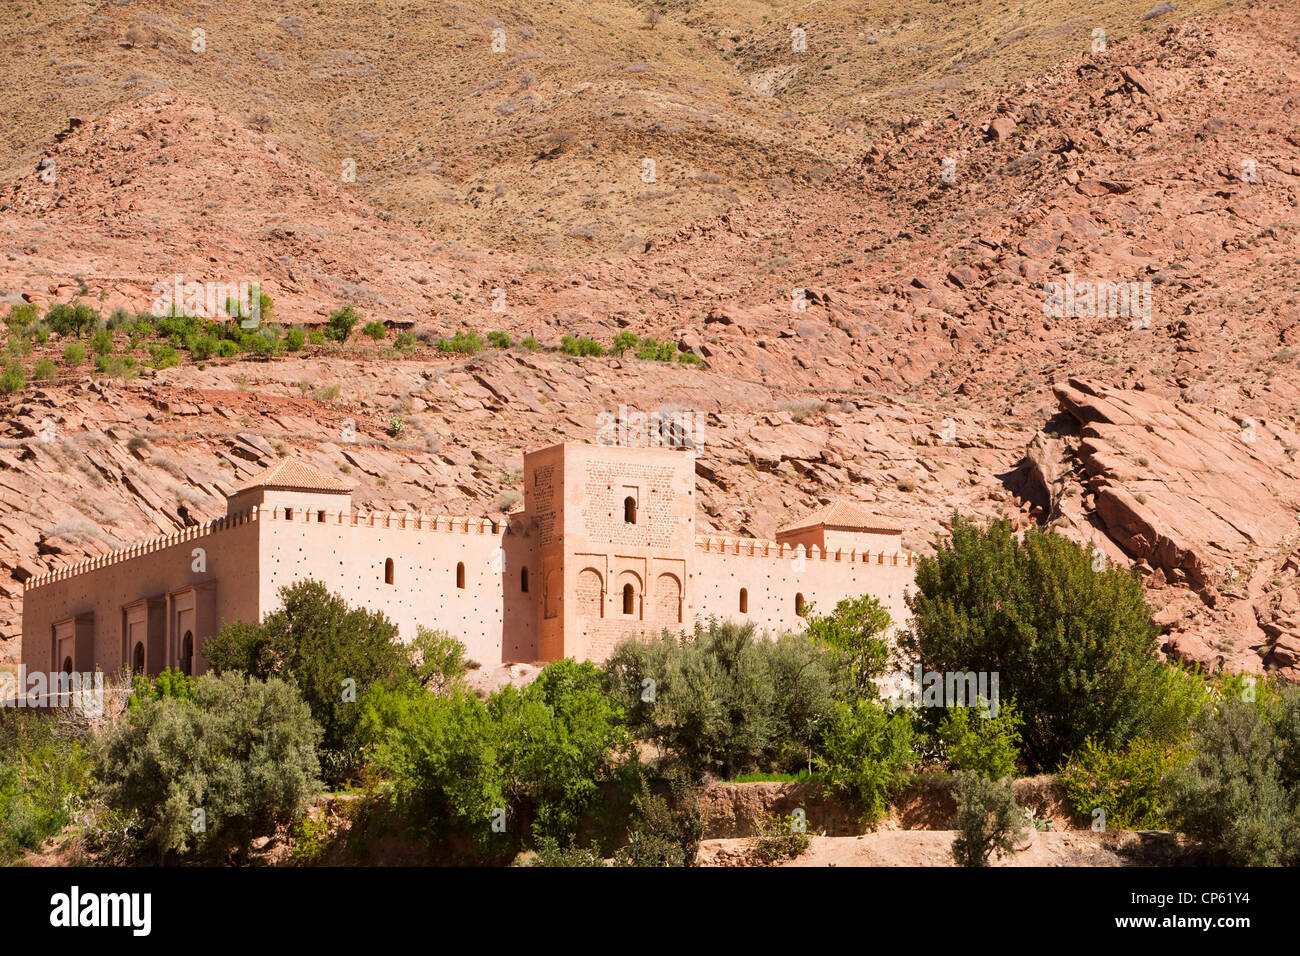 the ancient Tin Mal mosque in the Anti Atlas mountains of Morocco. Stock Photo